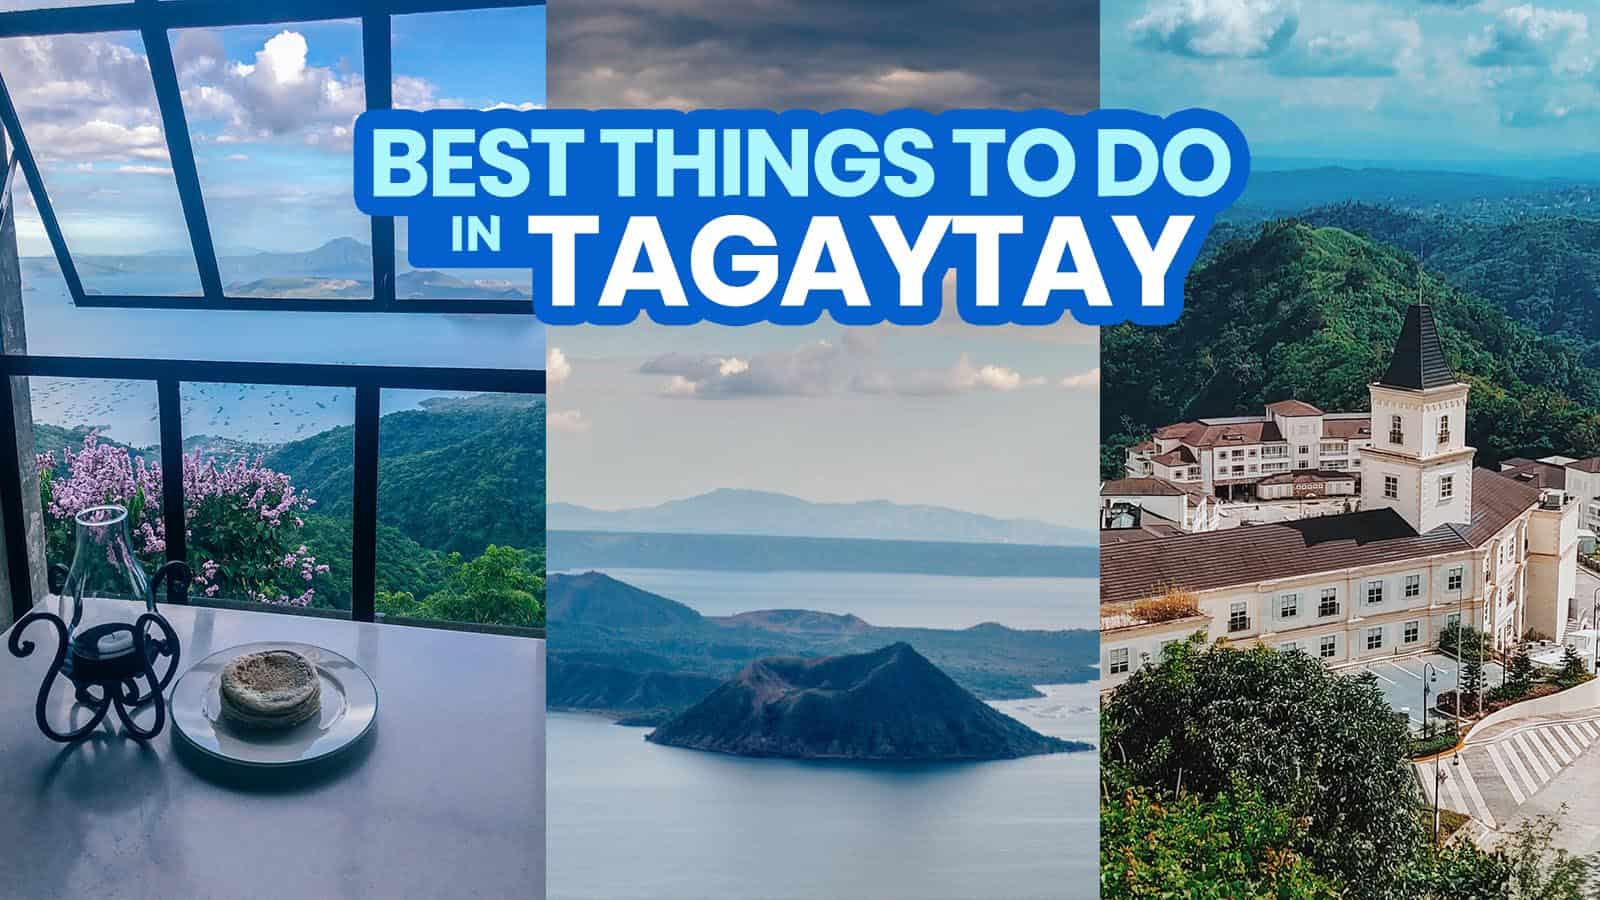 place to visit tagaytay